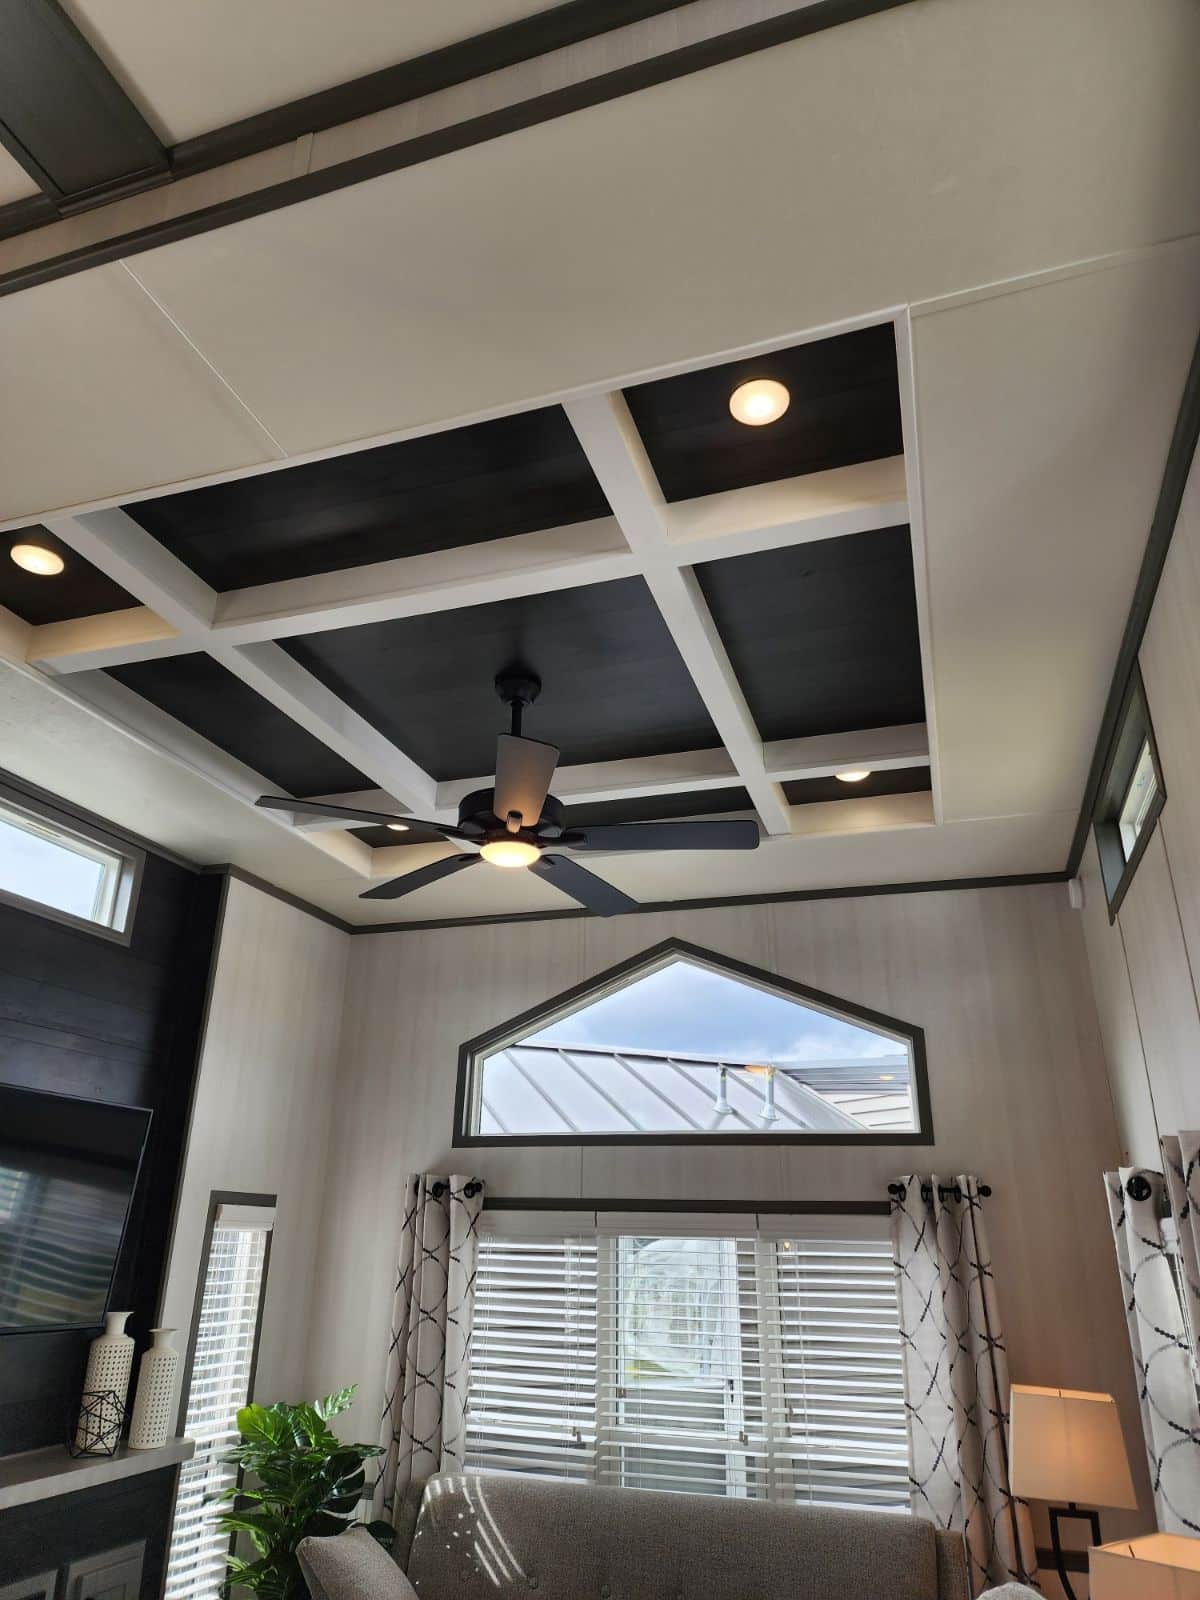 A ceiling in a living room of a tiny house.